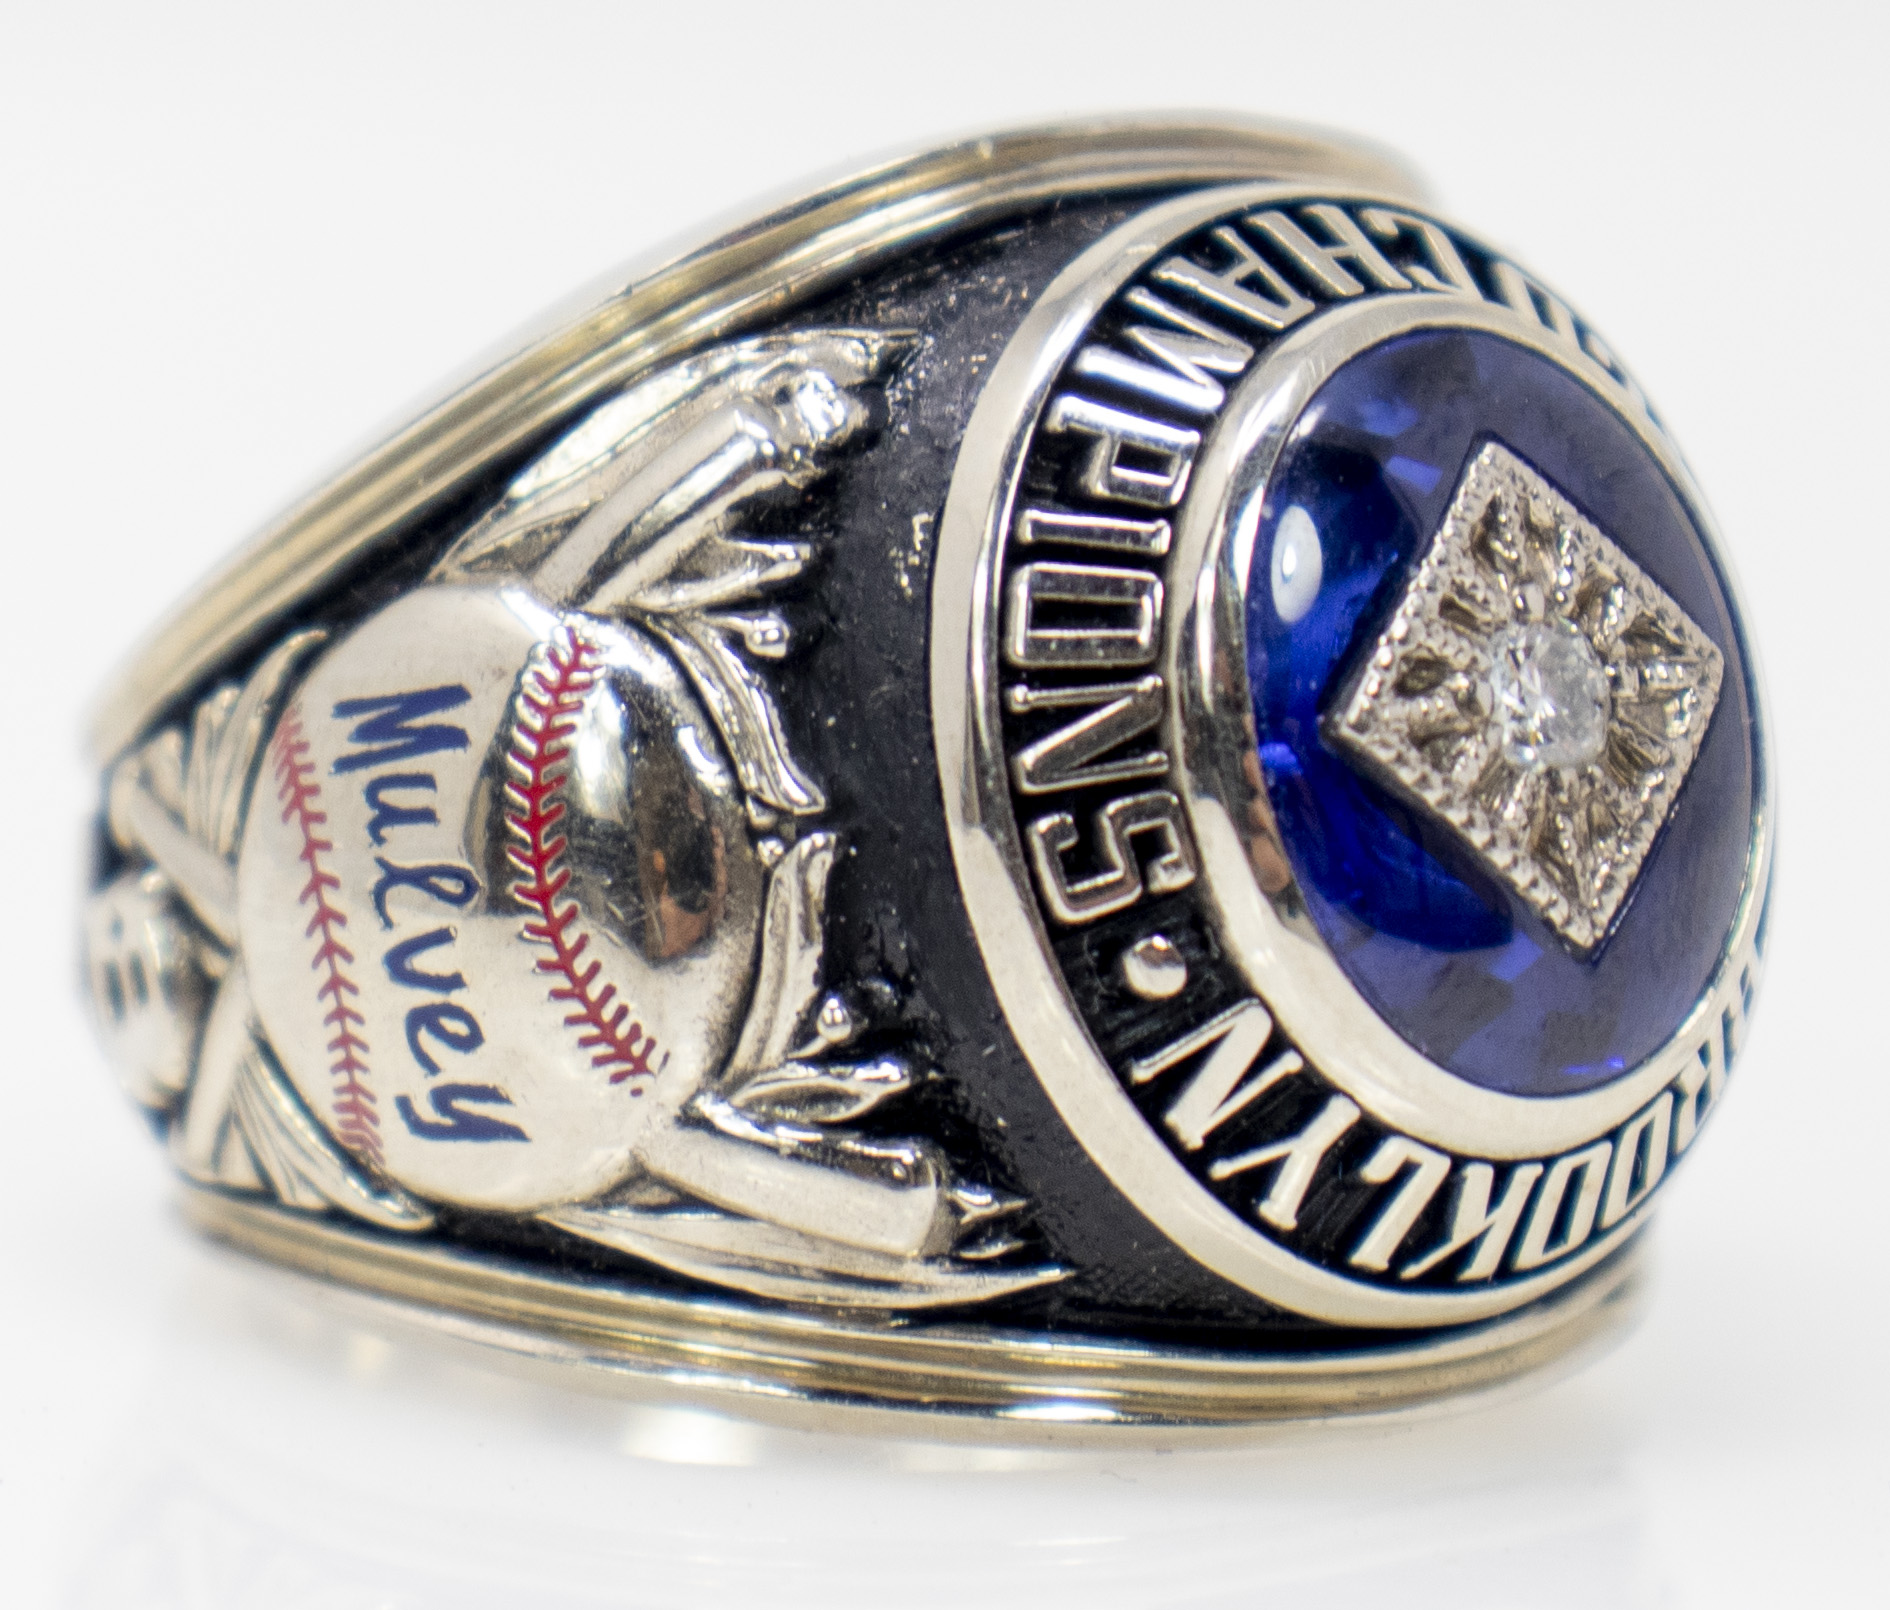 Sell Your 1955 Brooklyn Dodgers World Series Ring for 60,000